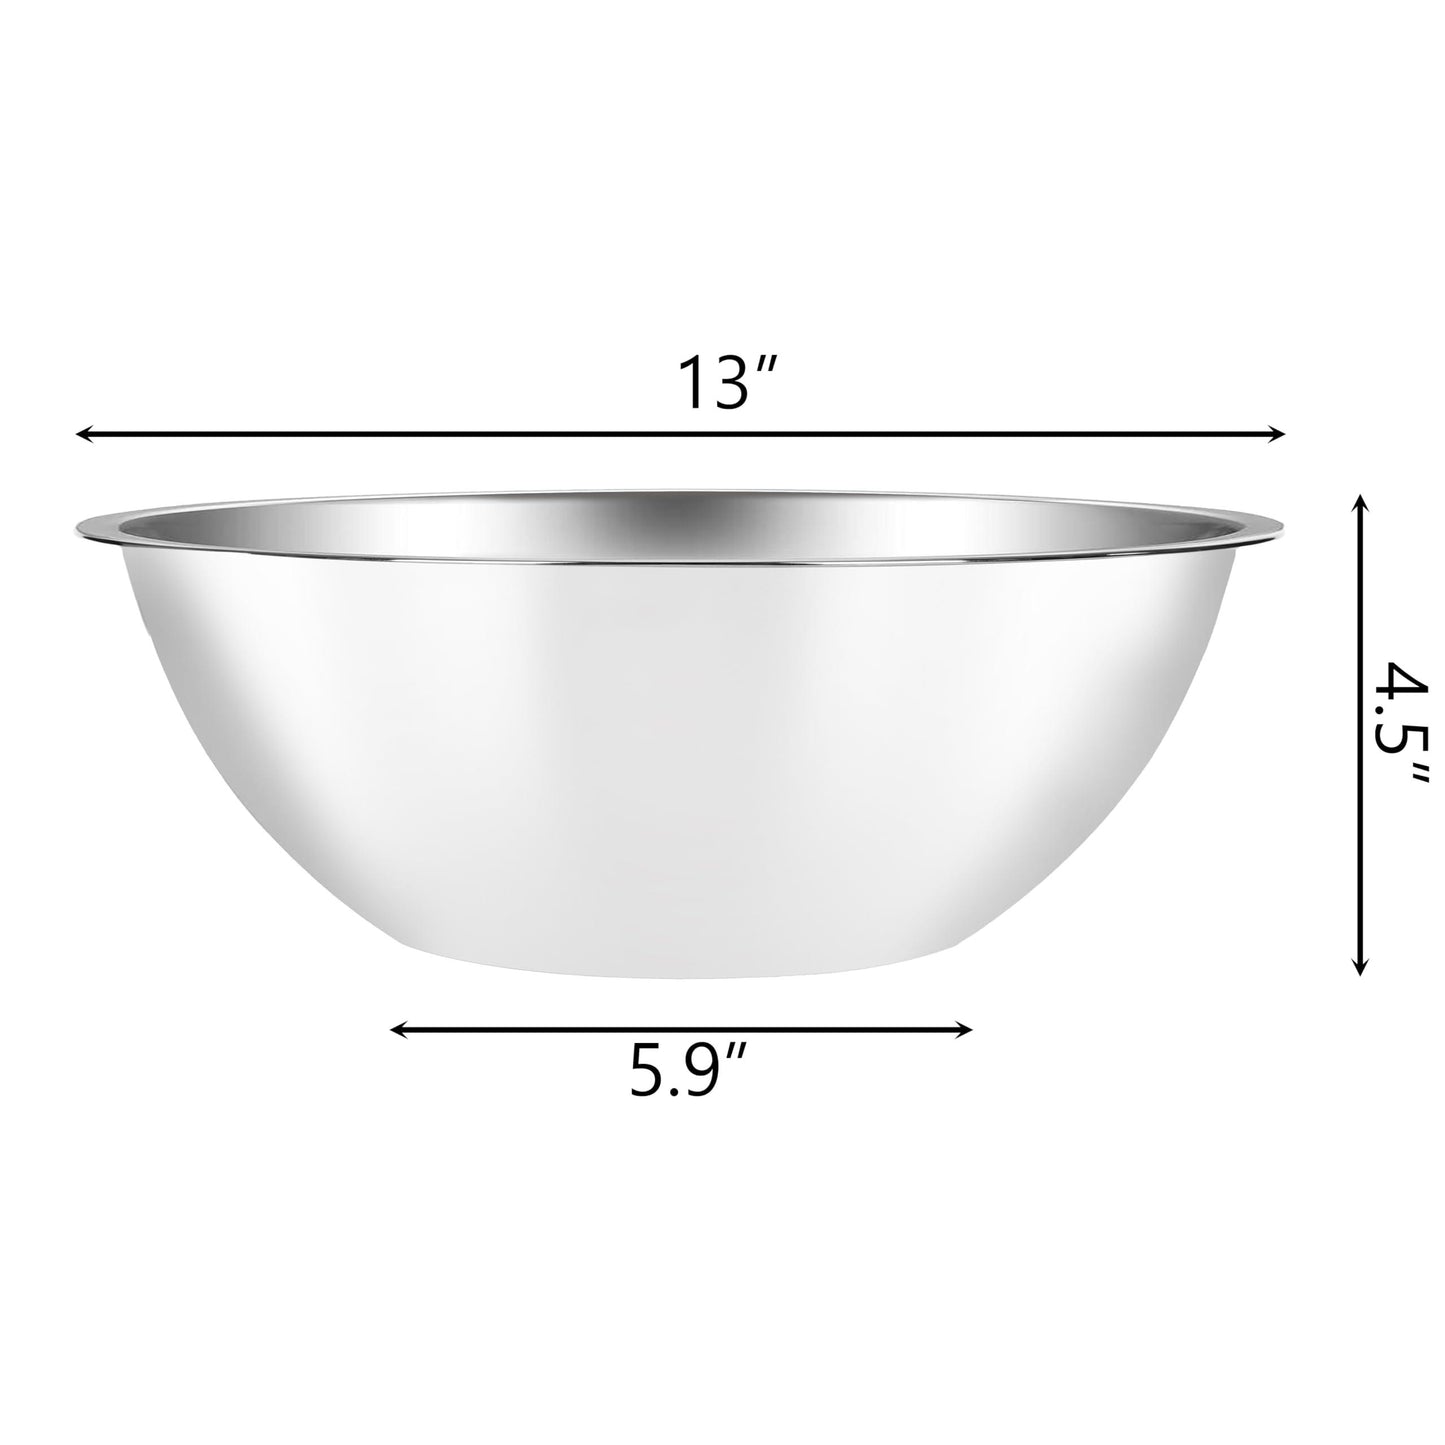 Suwimut 3 Pack Stainless Steel Mixing Bowls, 5 Quart Flat Base Stainless Steel Serving Bowls, 13 Inch Mirror Polish Large Metal Bowl Set for Kitchen Cooking, Baking, Prepping - CookCave